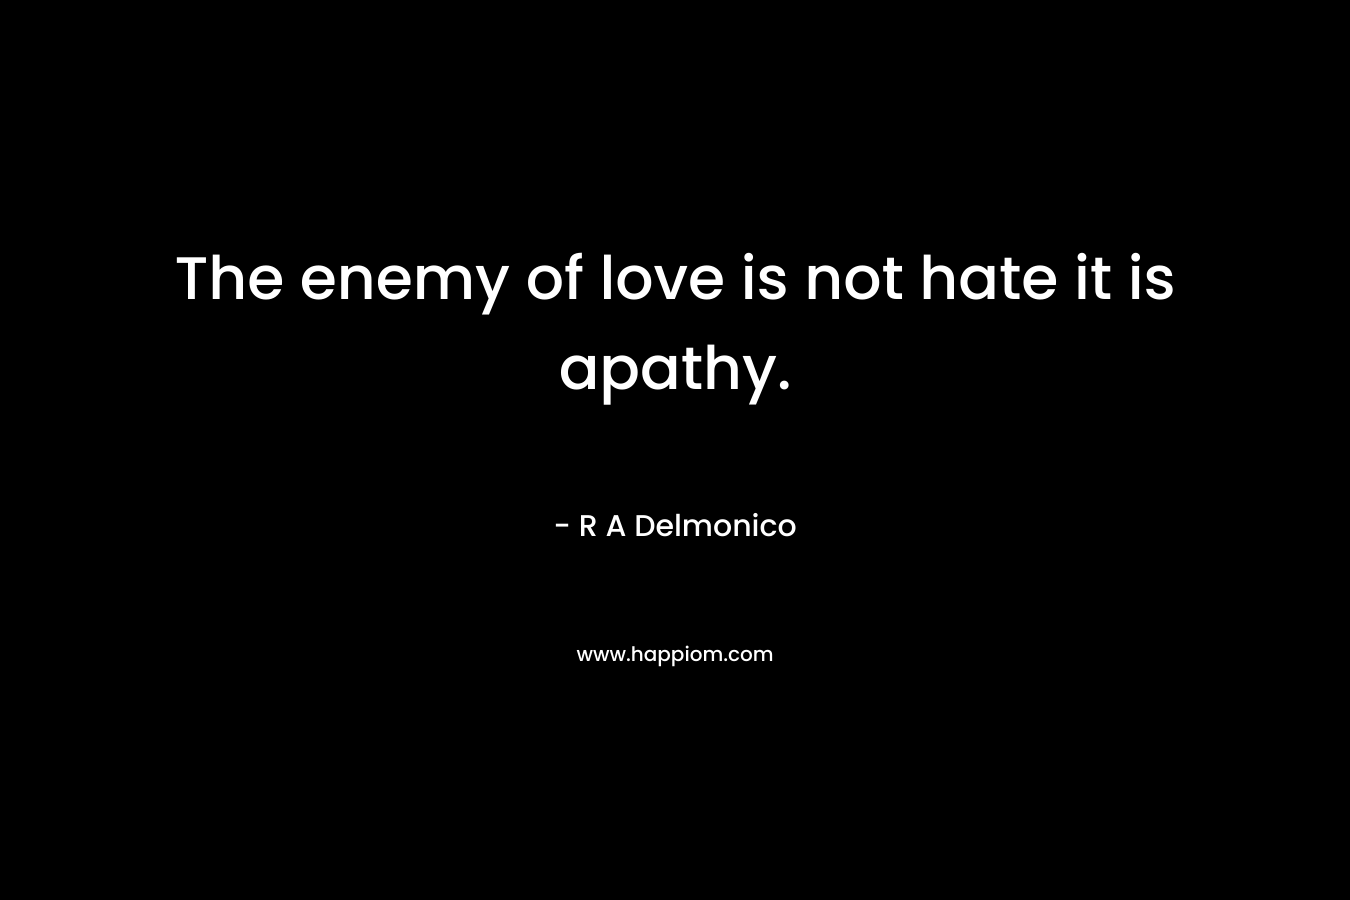 The enemy of love is not hate it is apathy. – R A Delmonico